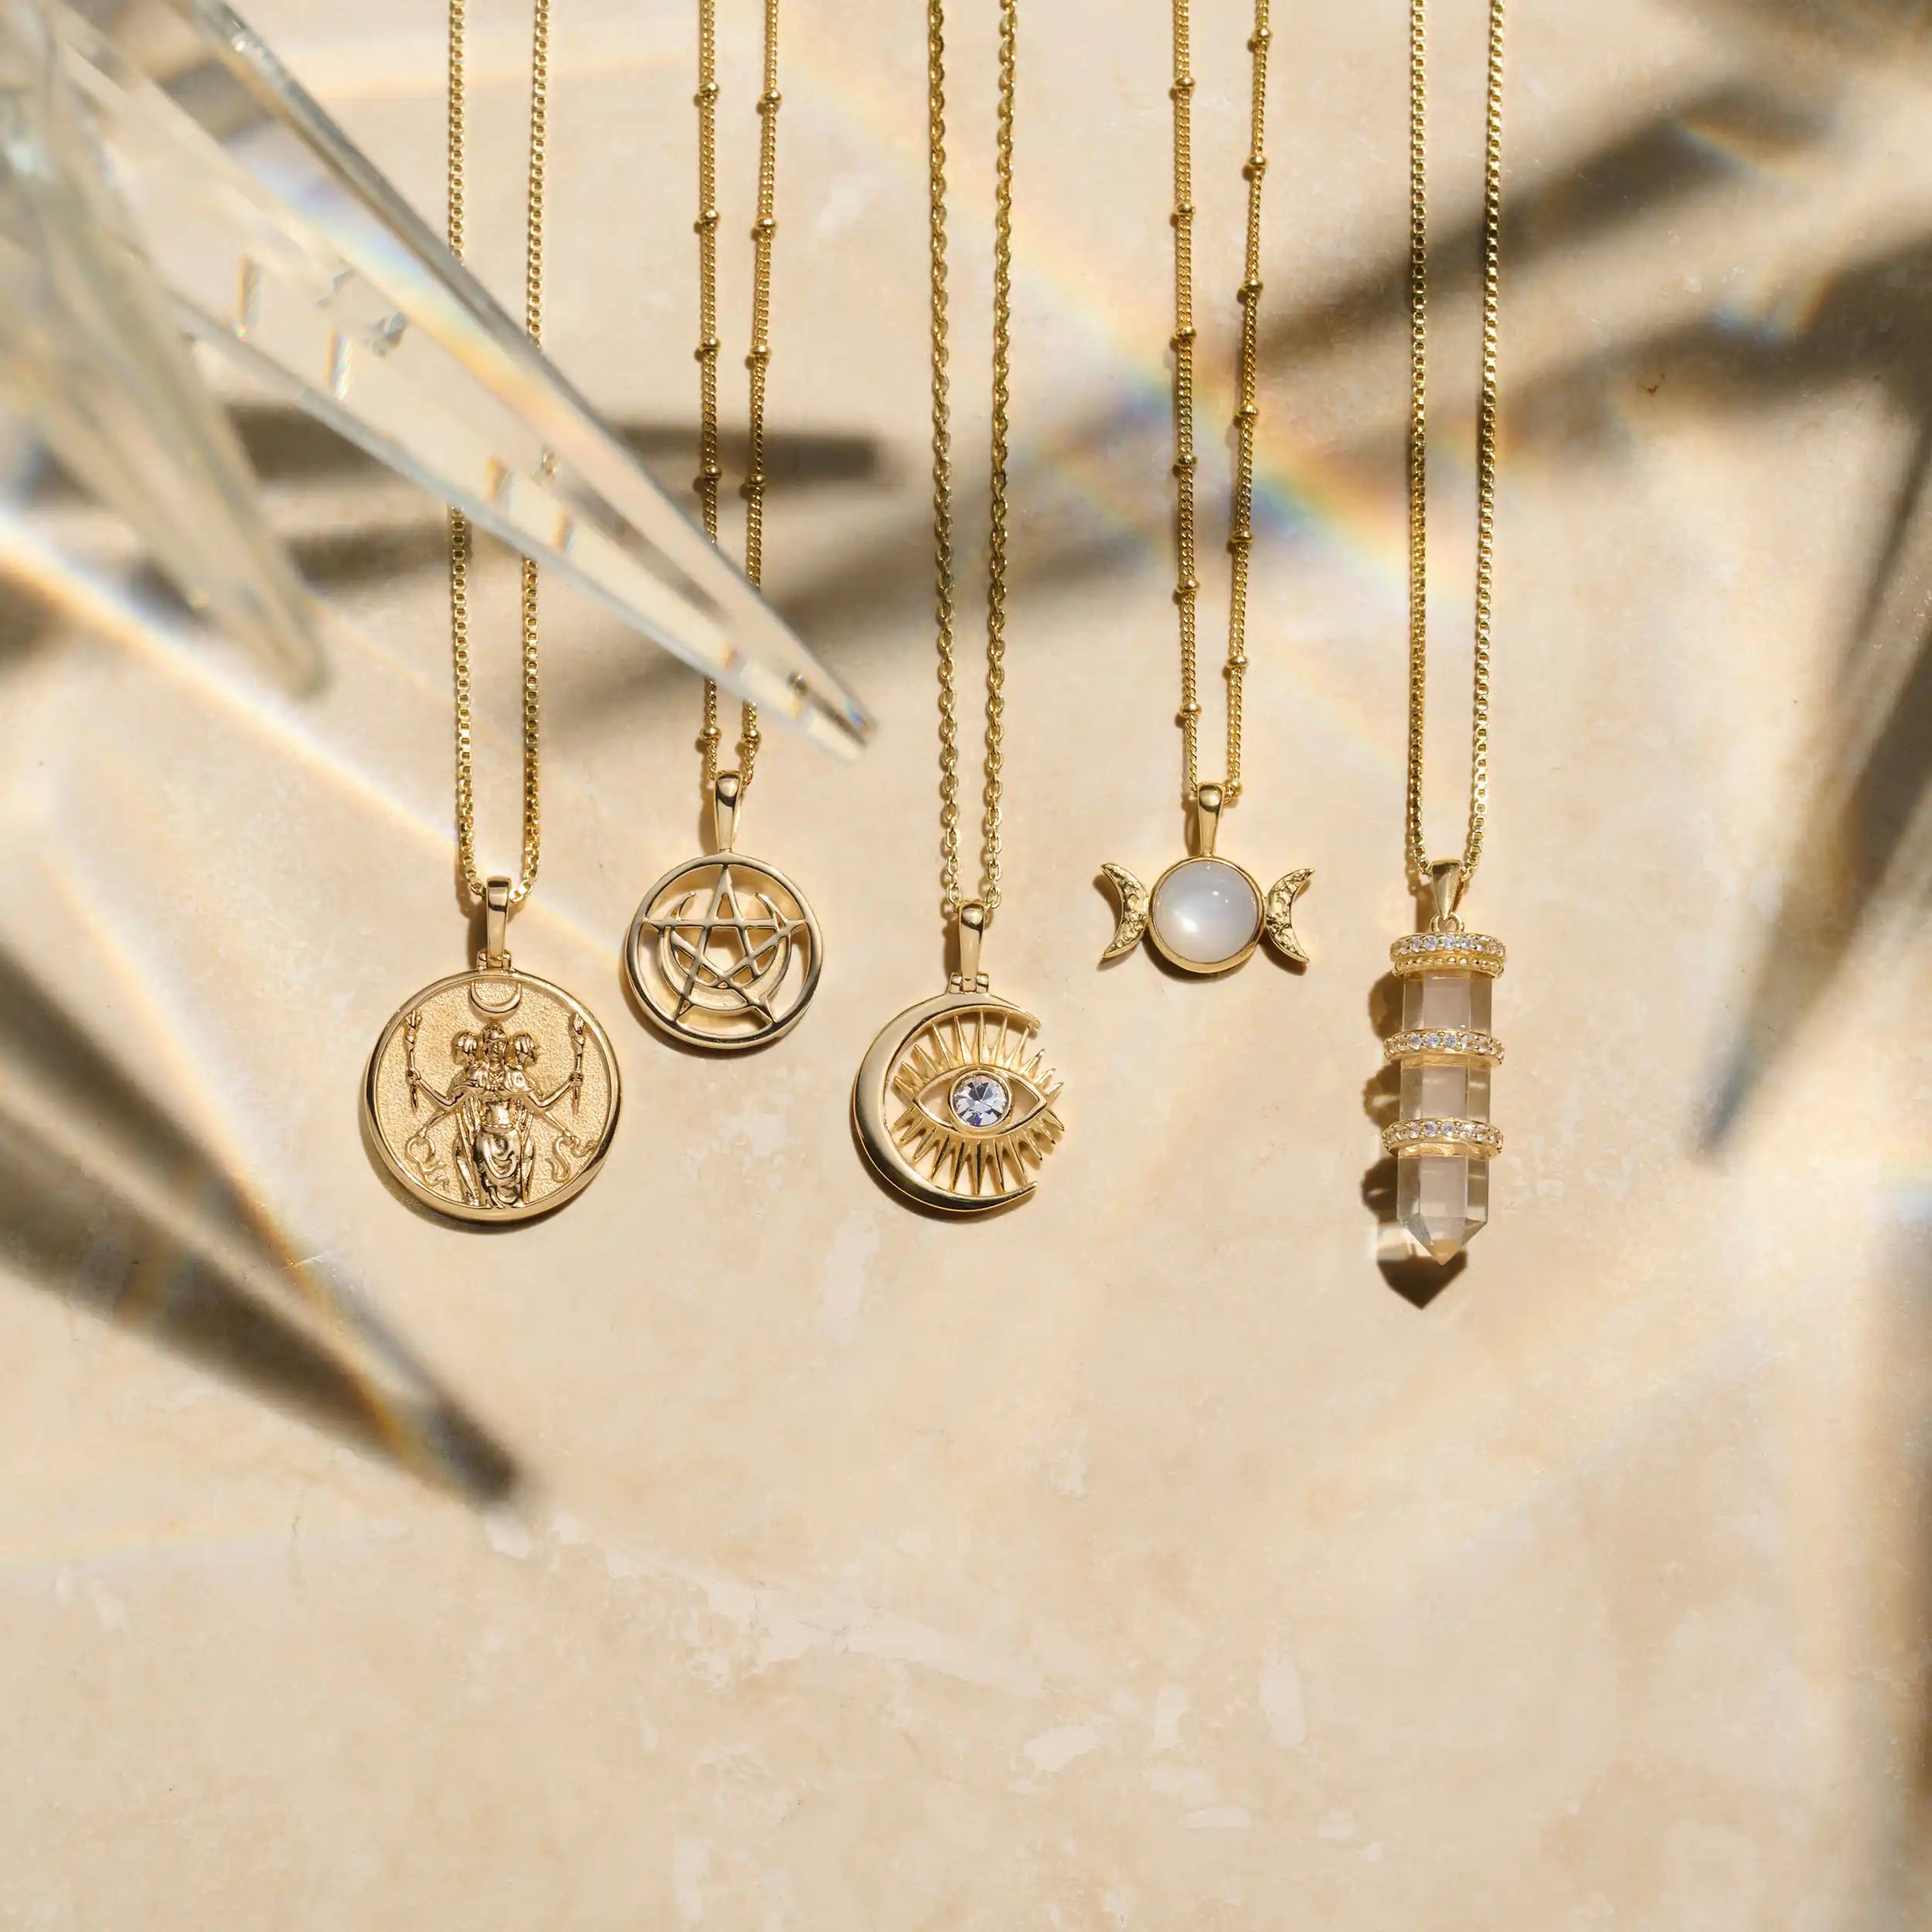 Zodiac silver pendants and celestial jewelry findings